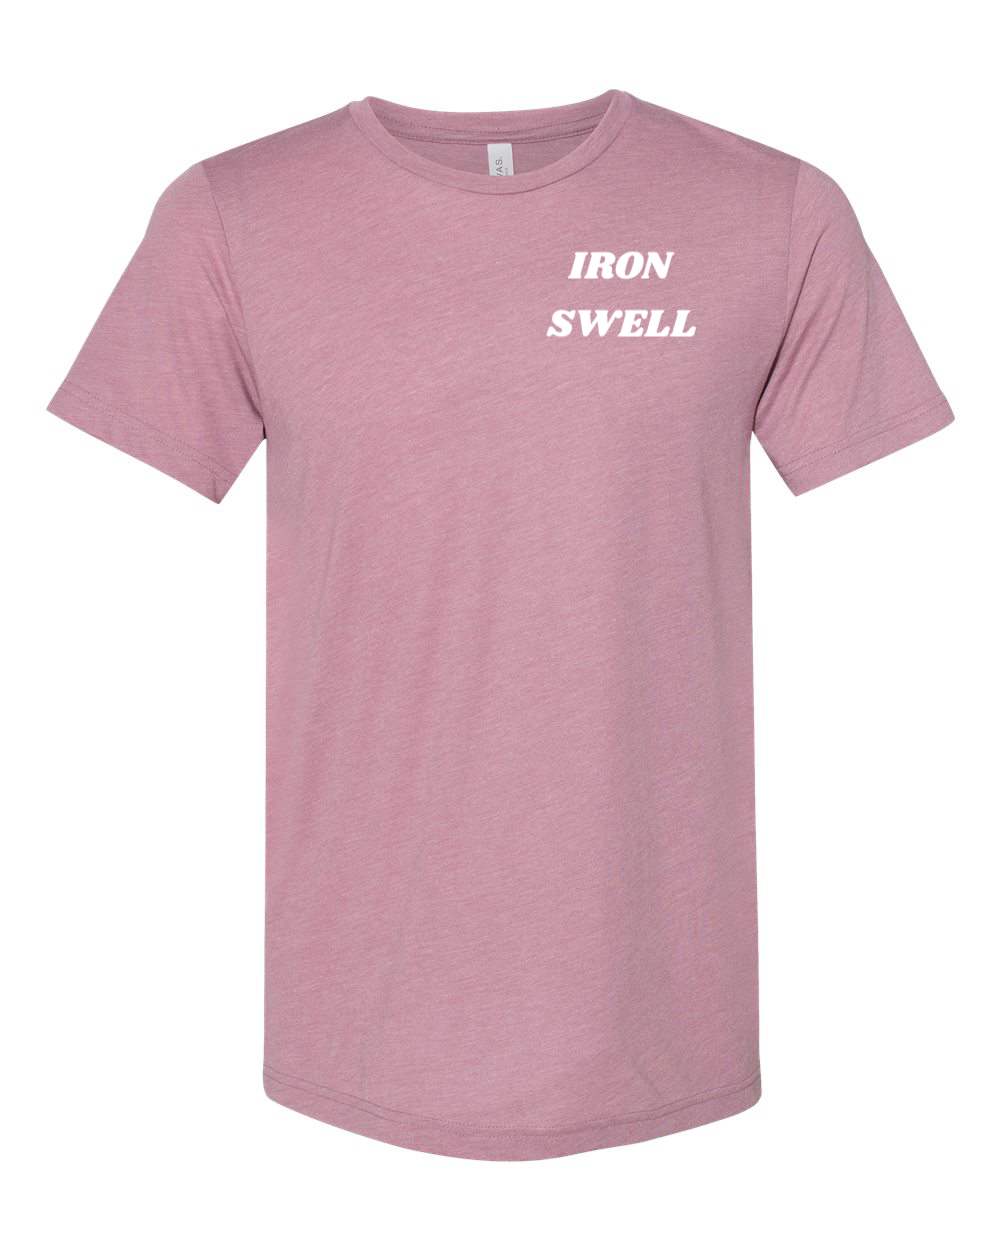 Iron Swell Tee - Orchid